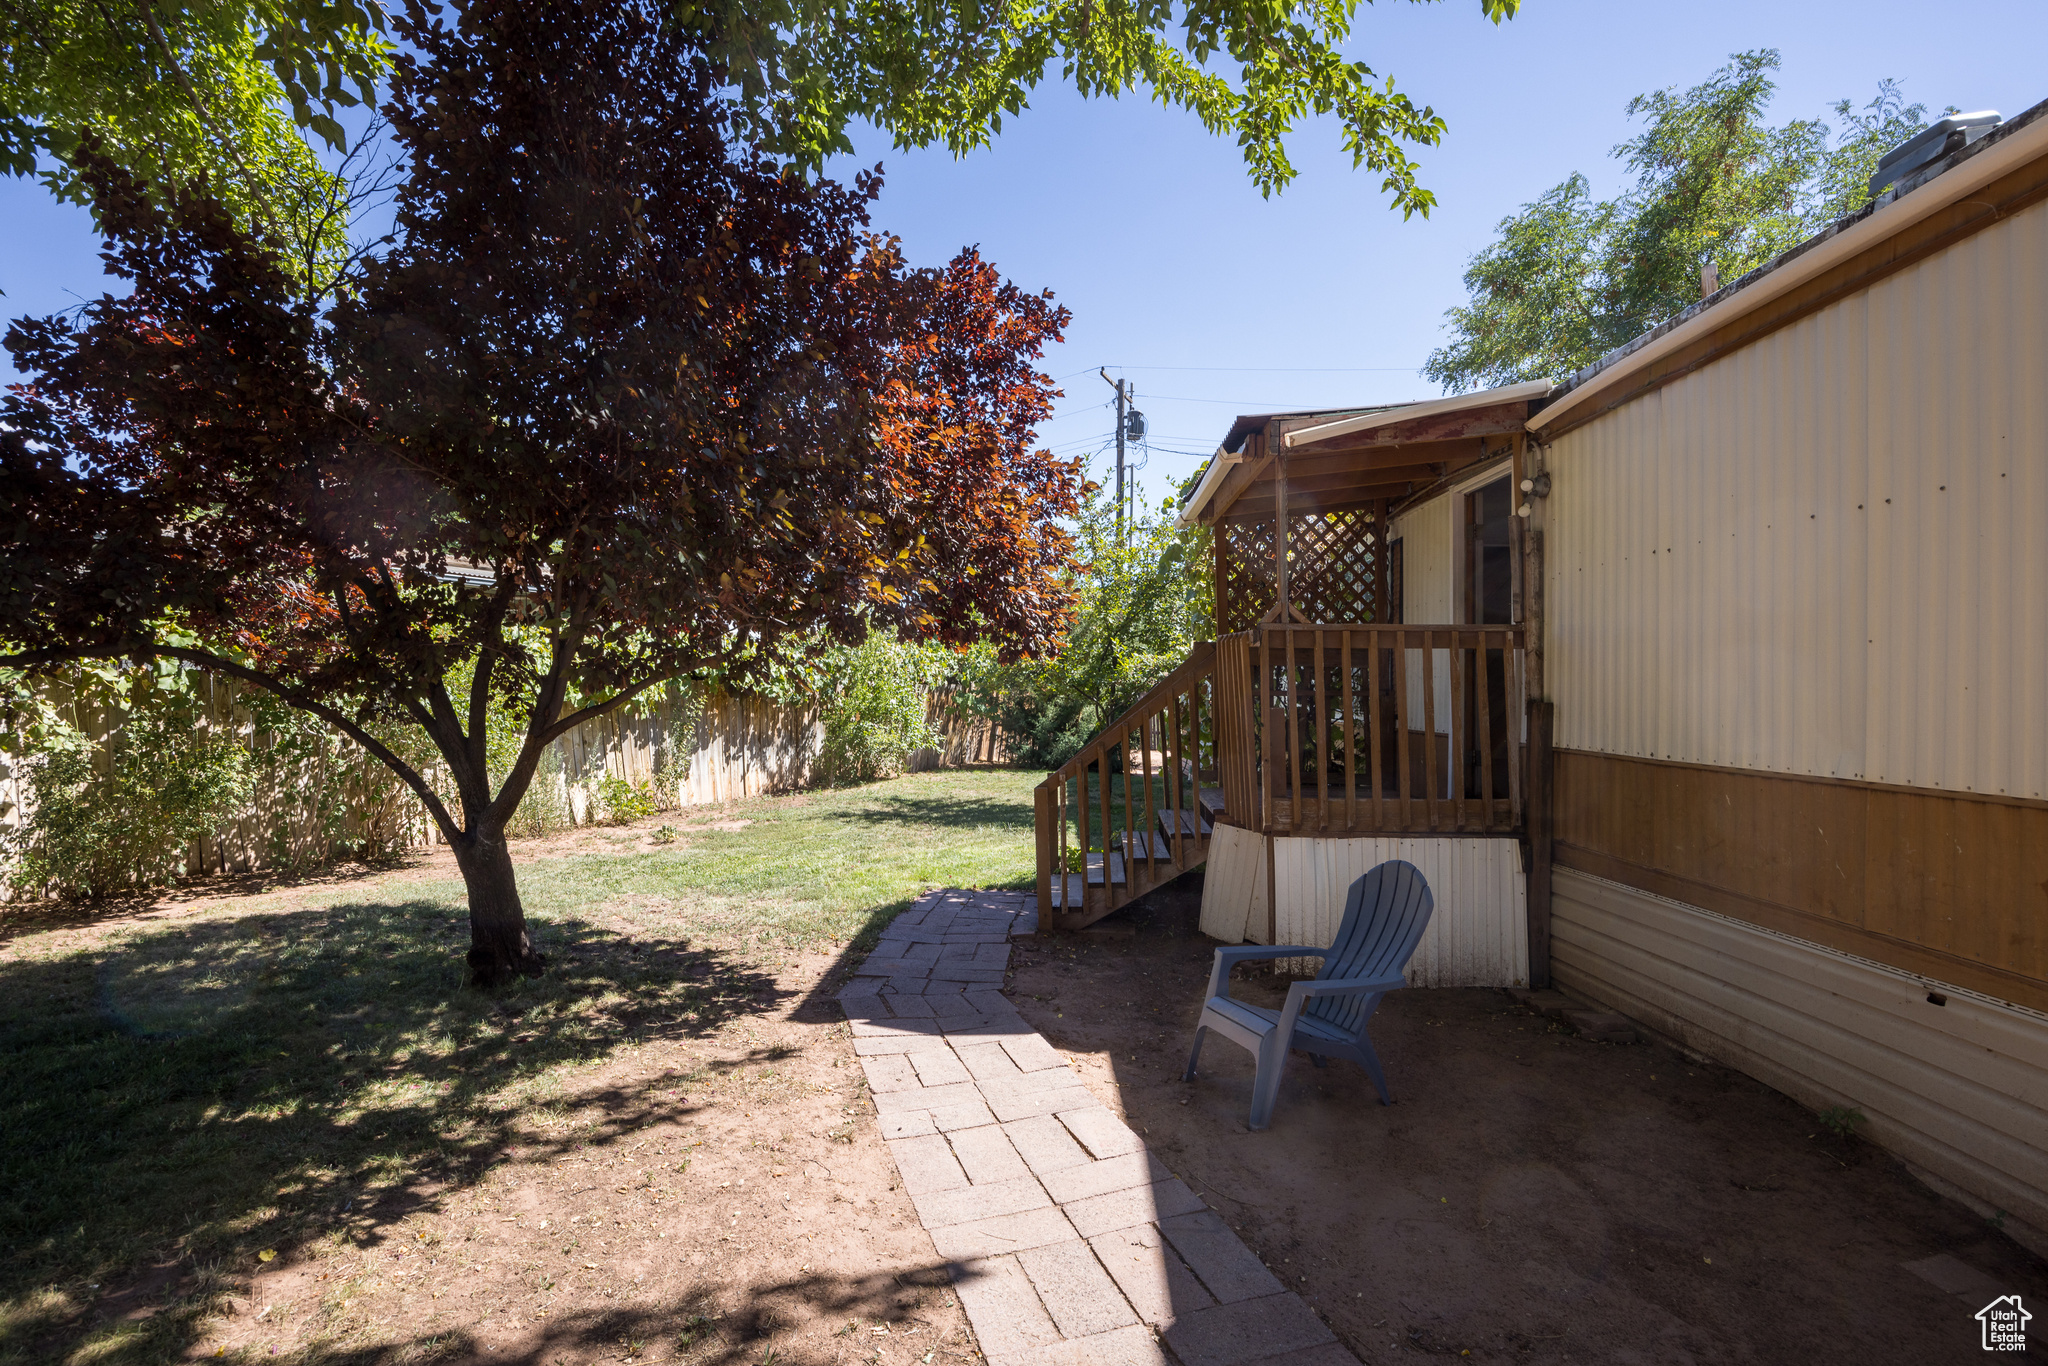 381 MCGILL, Moab, Utah 84532, 2 Bedrooms Bedrooms, 6 Rooms Rooms,1 BathroomBathrooms,Residential,For sale,MCGILL,1984596